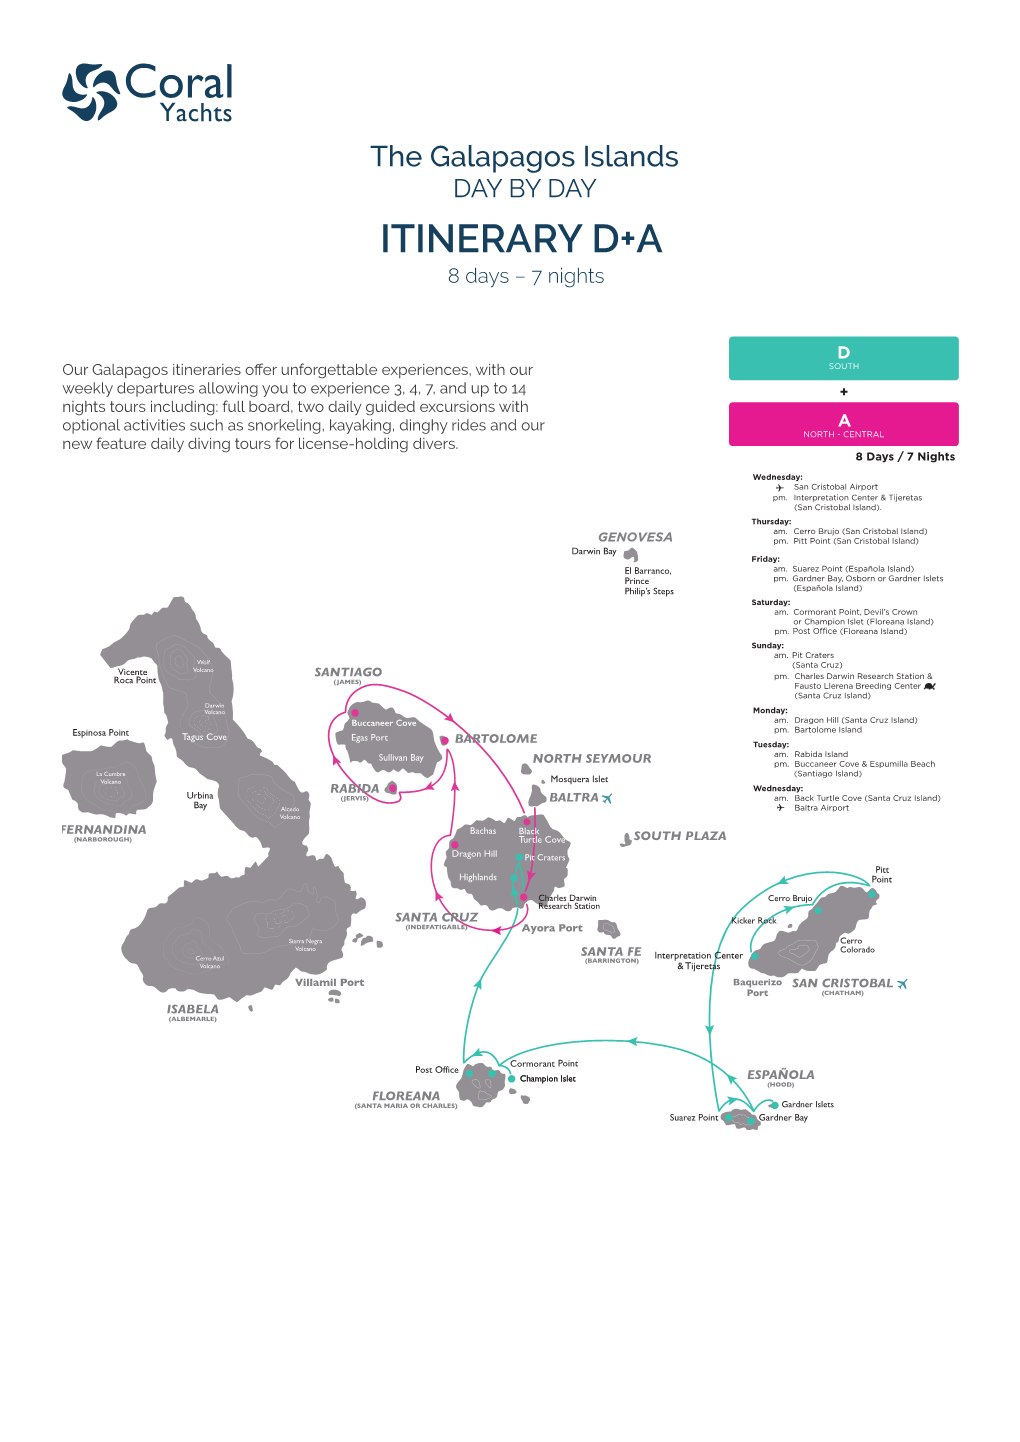 The Galapagos Islands DAY by DAY ITINERARY D+A 8 Days – 7 Nights